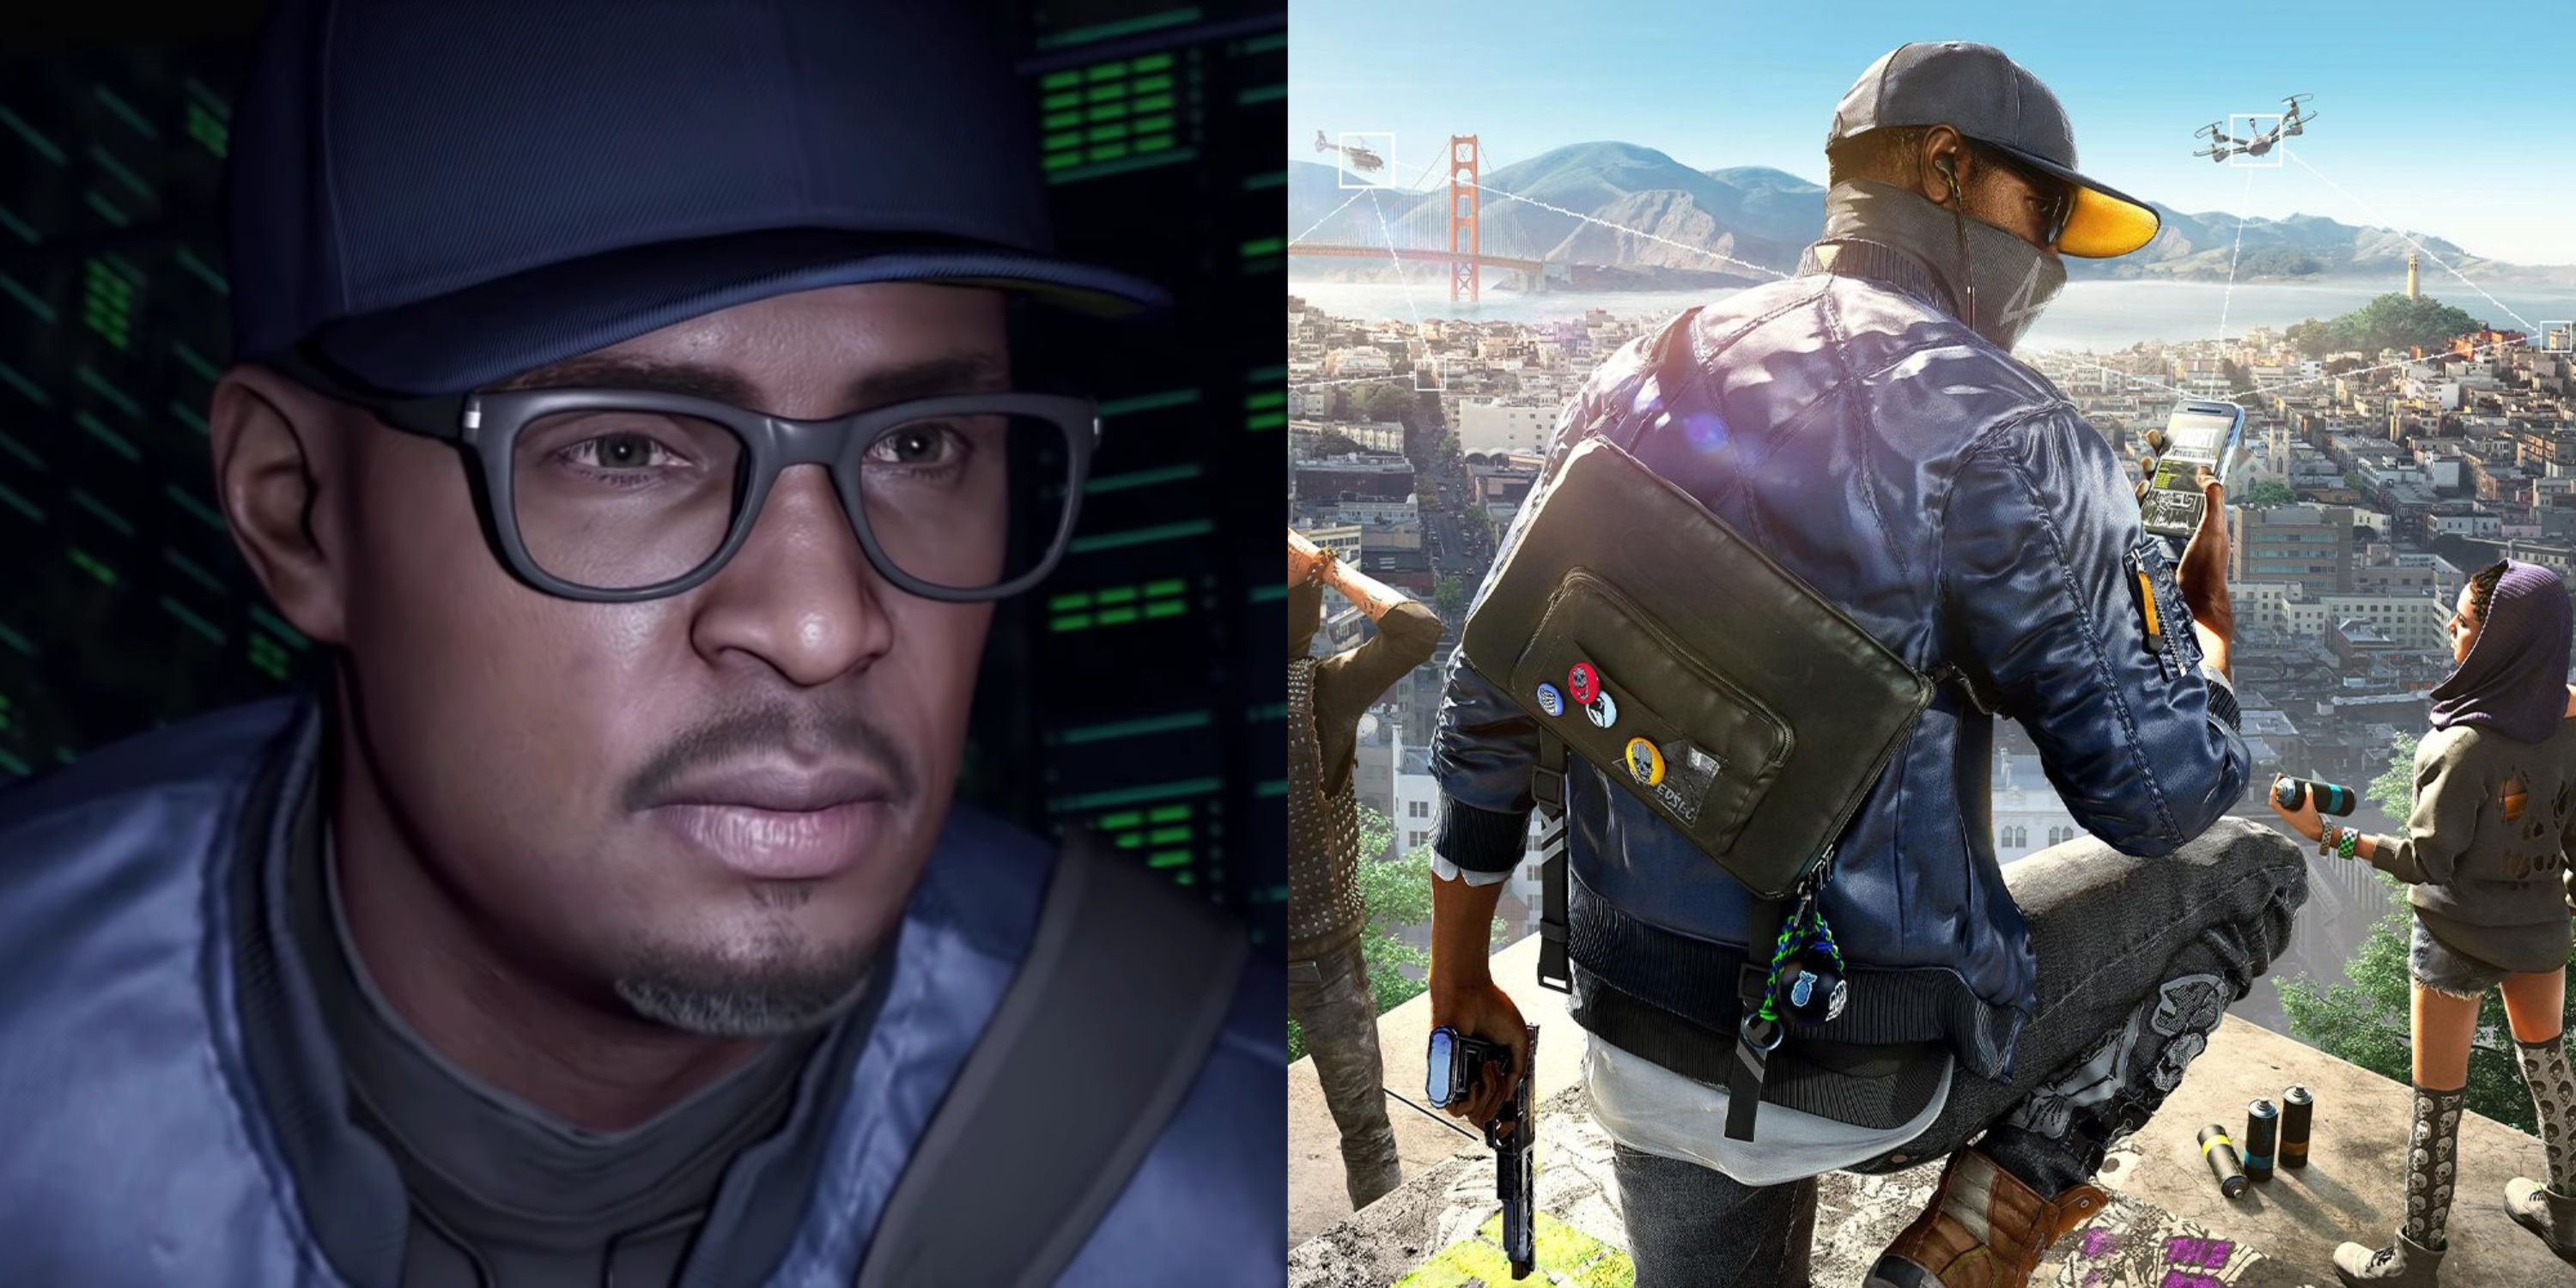 Featured image split Marcus looking at a screen in Watch Dogs 2 and cover art for the game